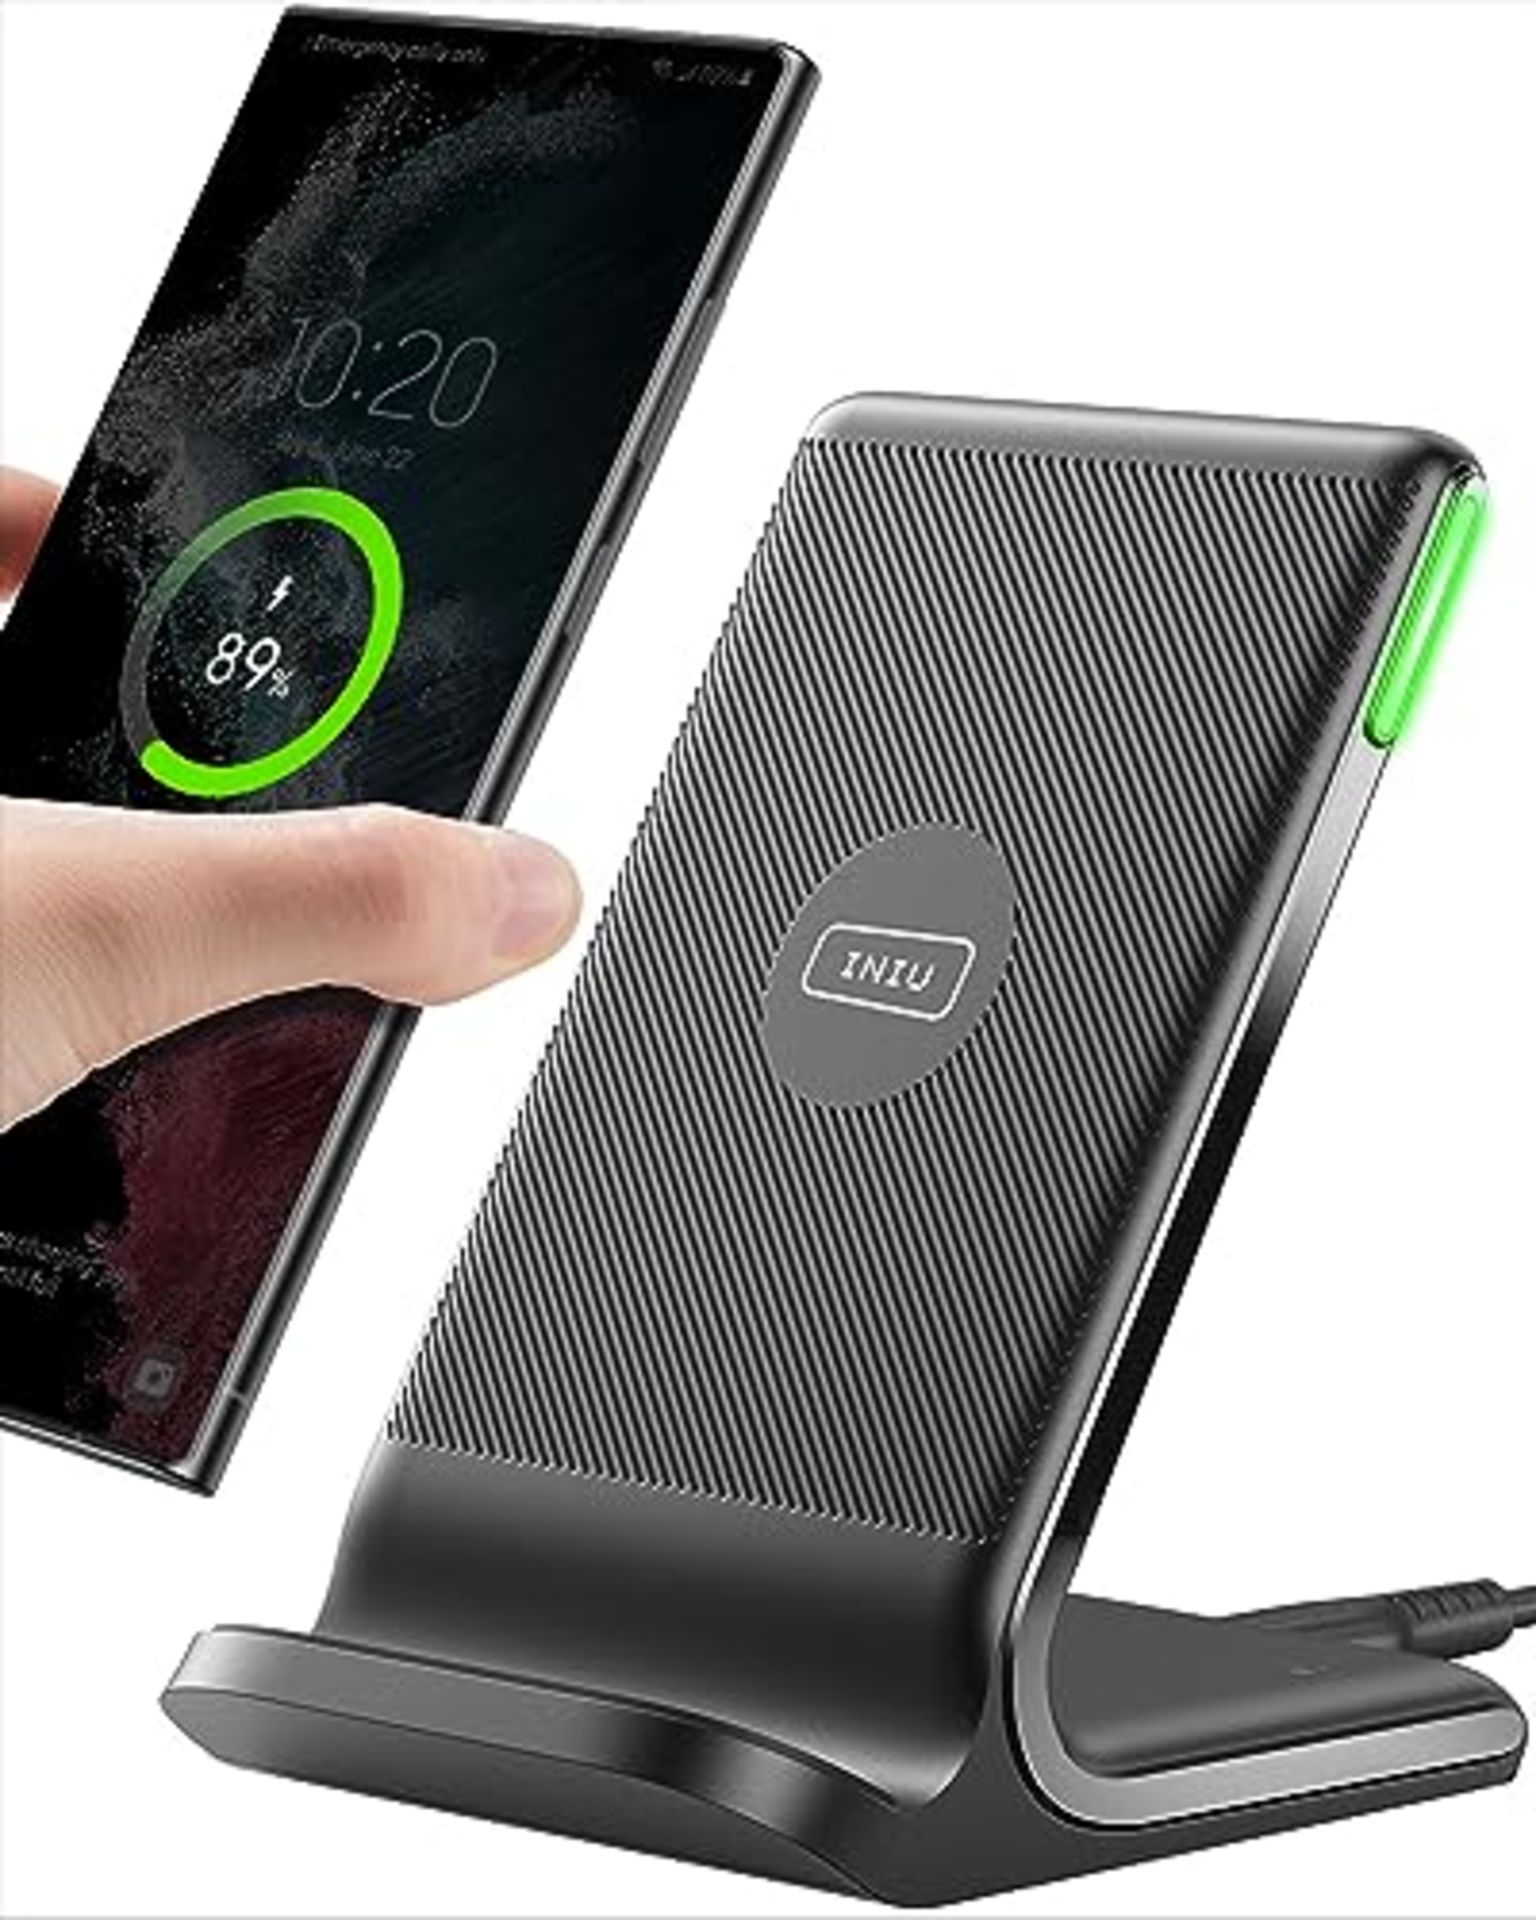 INIU Wireless Charger Stand, 15W Qi Certified Inductive Charging Station Fast Wireless